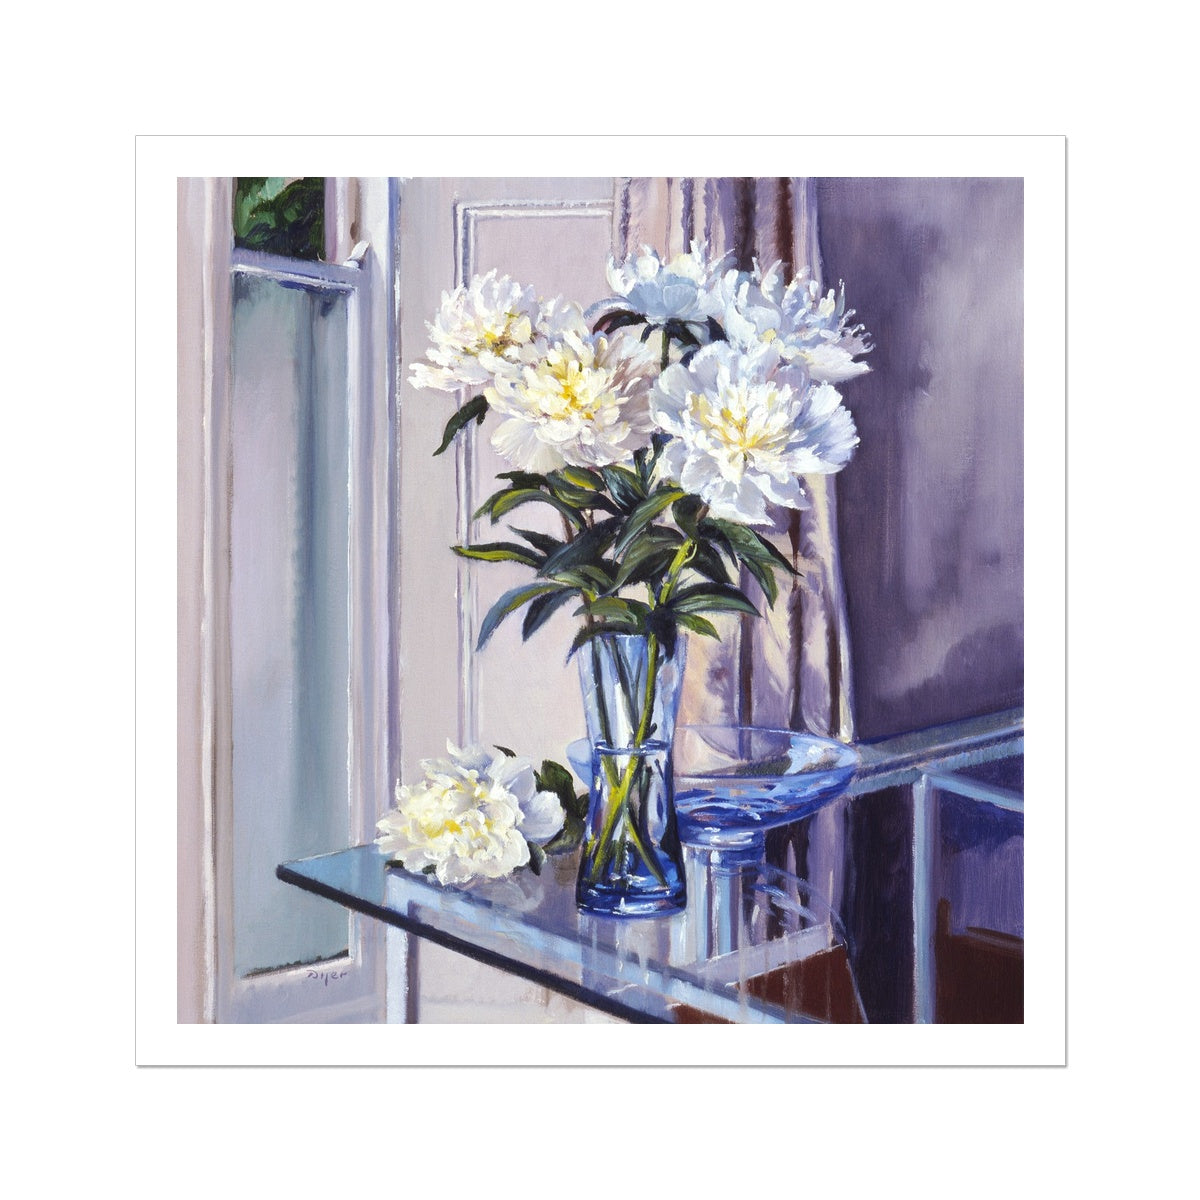 Ted Dyer Fine Art Print. Open Edition Cornish Art Print. 'White Peonies in a Blue Vase'. Cornwall Art Gallery